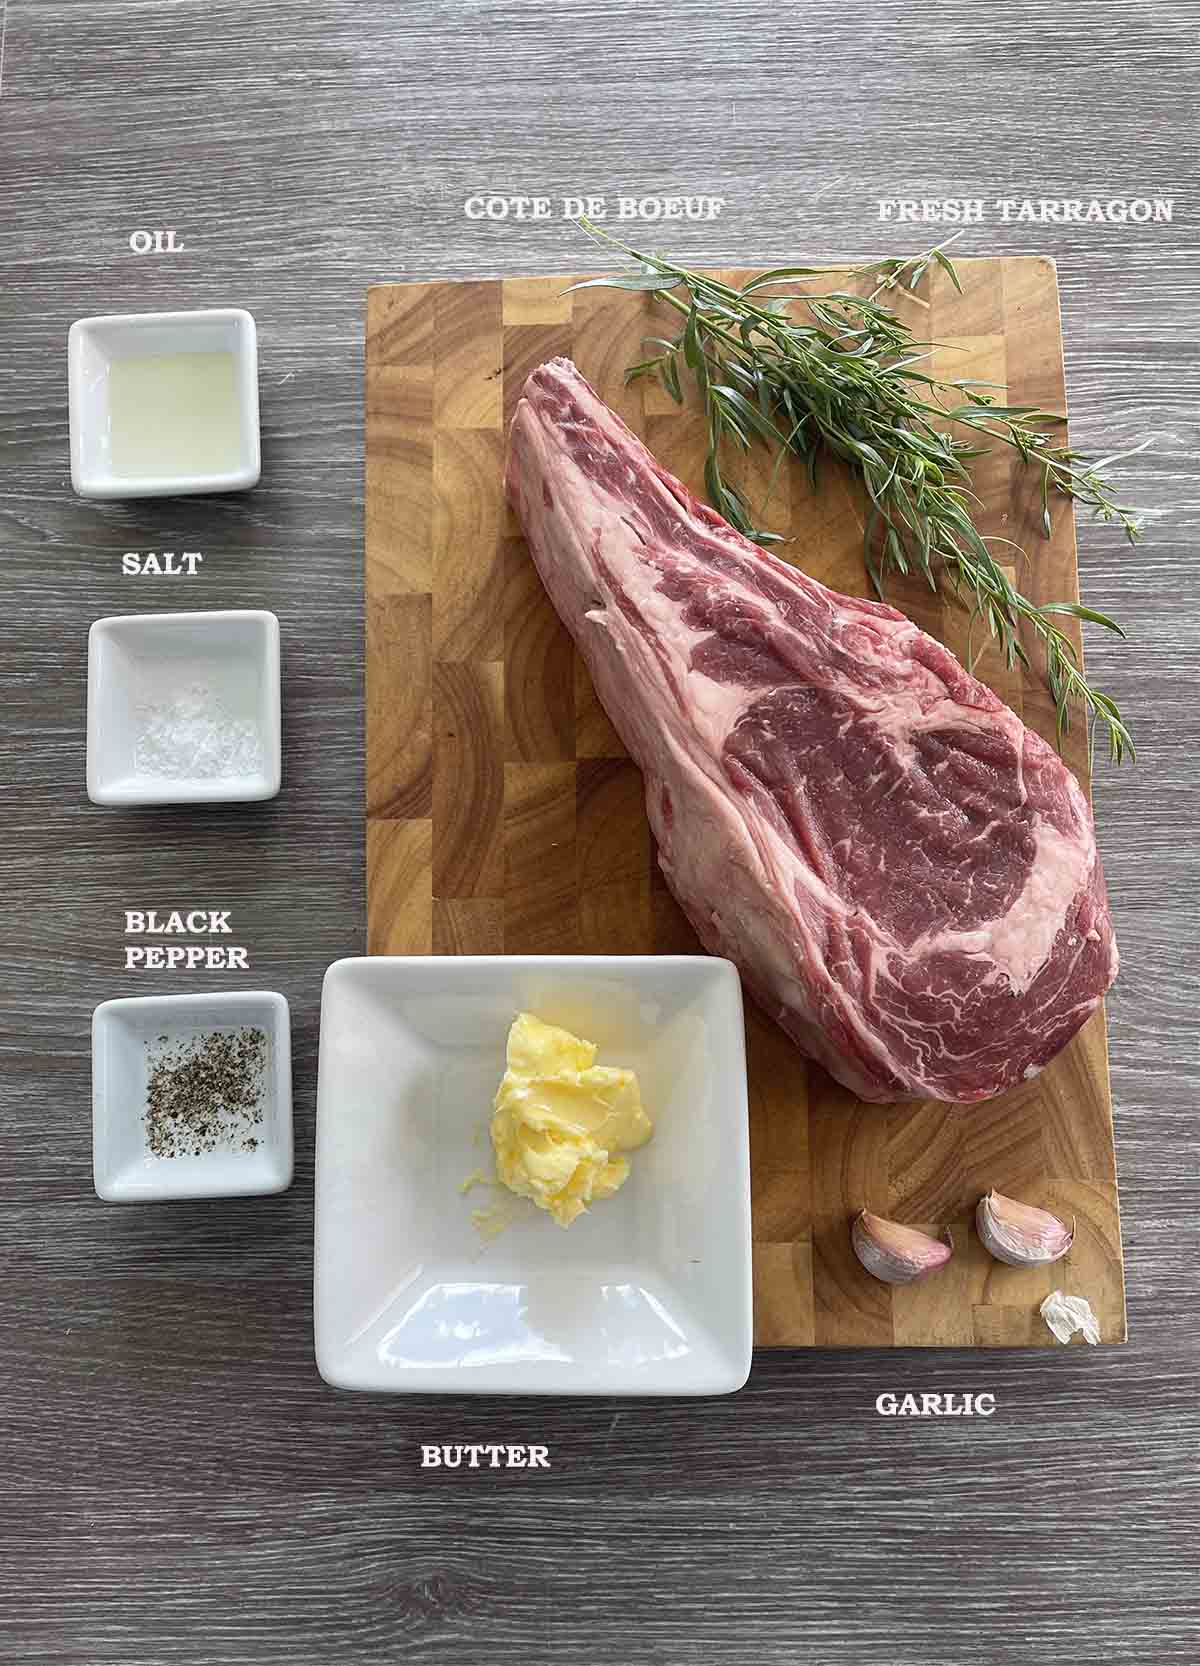 ingredients including beef, butter and seasoning.